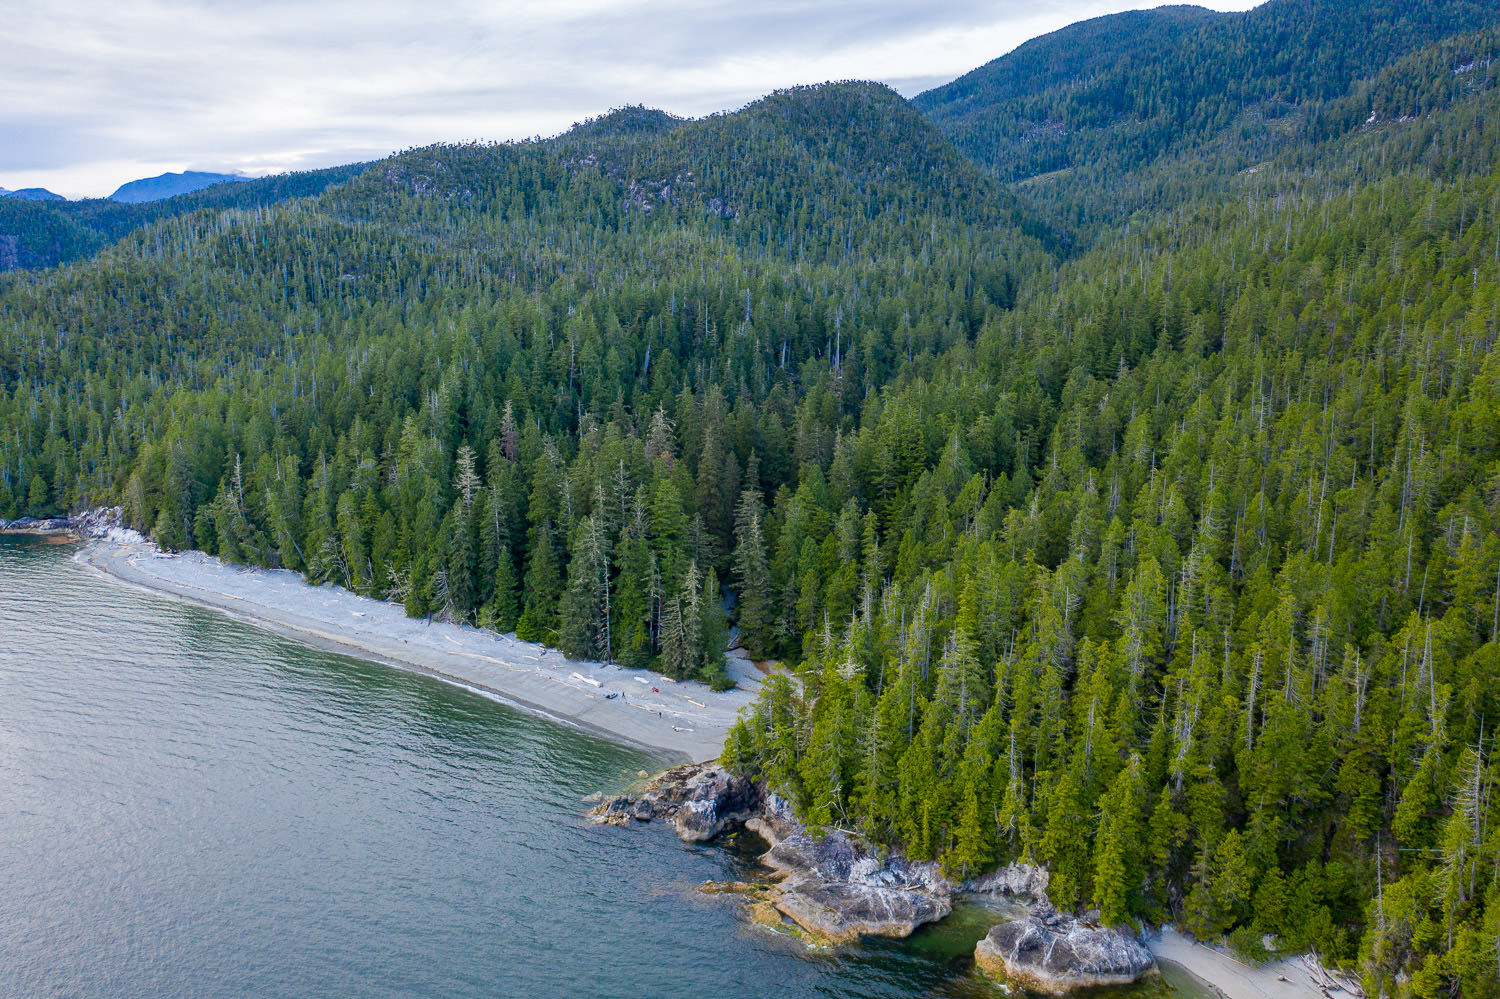 Overlooking the unprotected ancient forests of Vernon Bay in Barkley Sound in Uchucklesaht and Tseshaht nation territories. 33 logging cutblocks have been approved in this region, some overlapping with the newly recommended deferral areas.